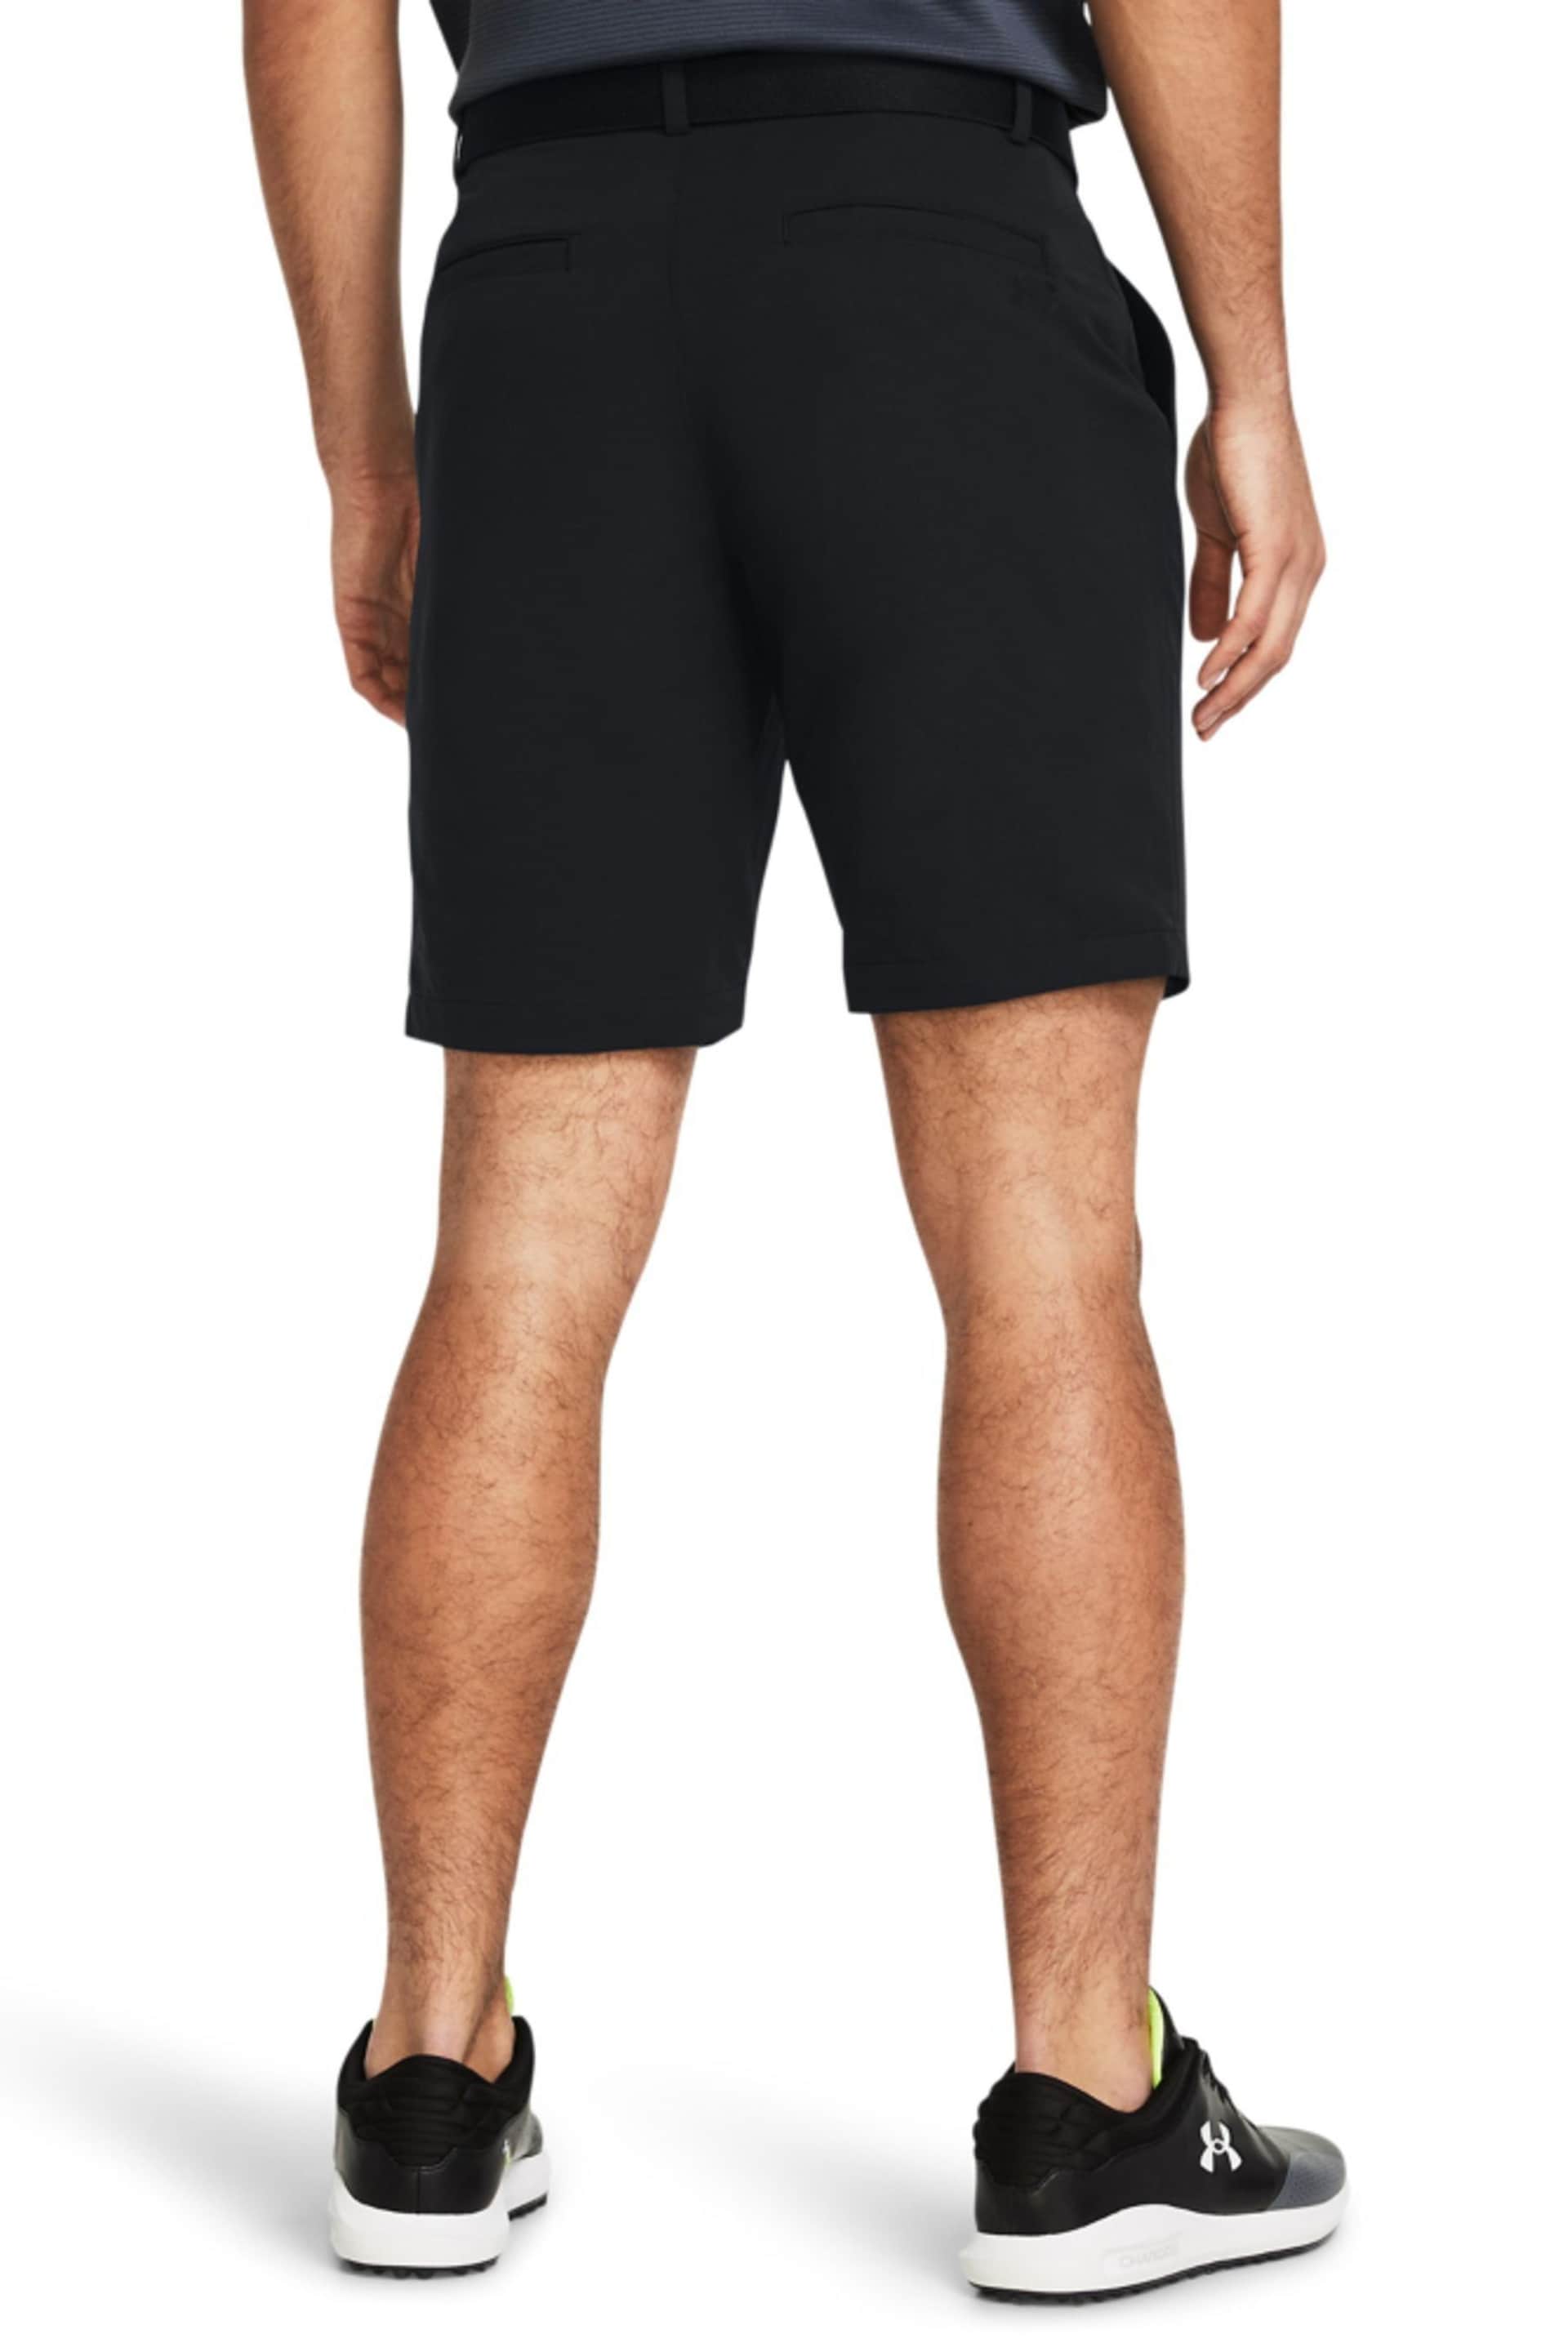 Under Armour Black Tech Taper Shorts - Image 2 of 6